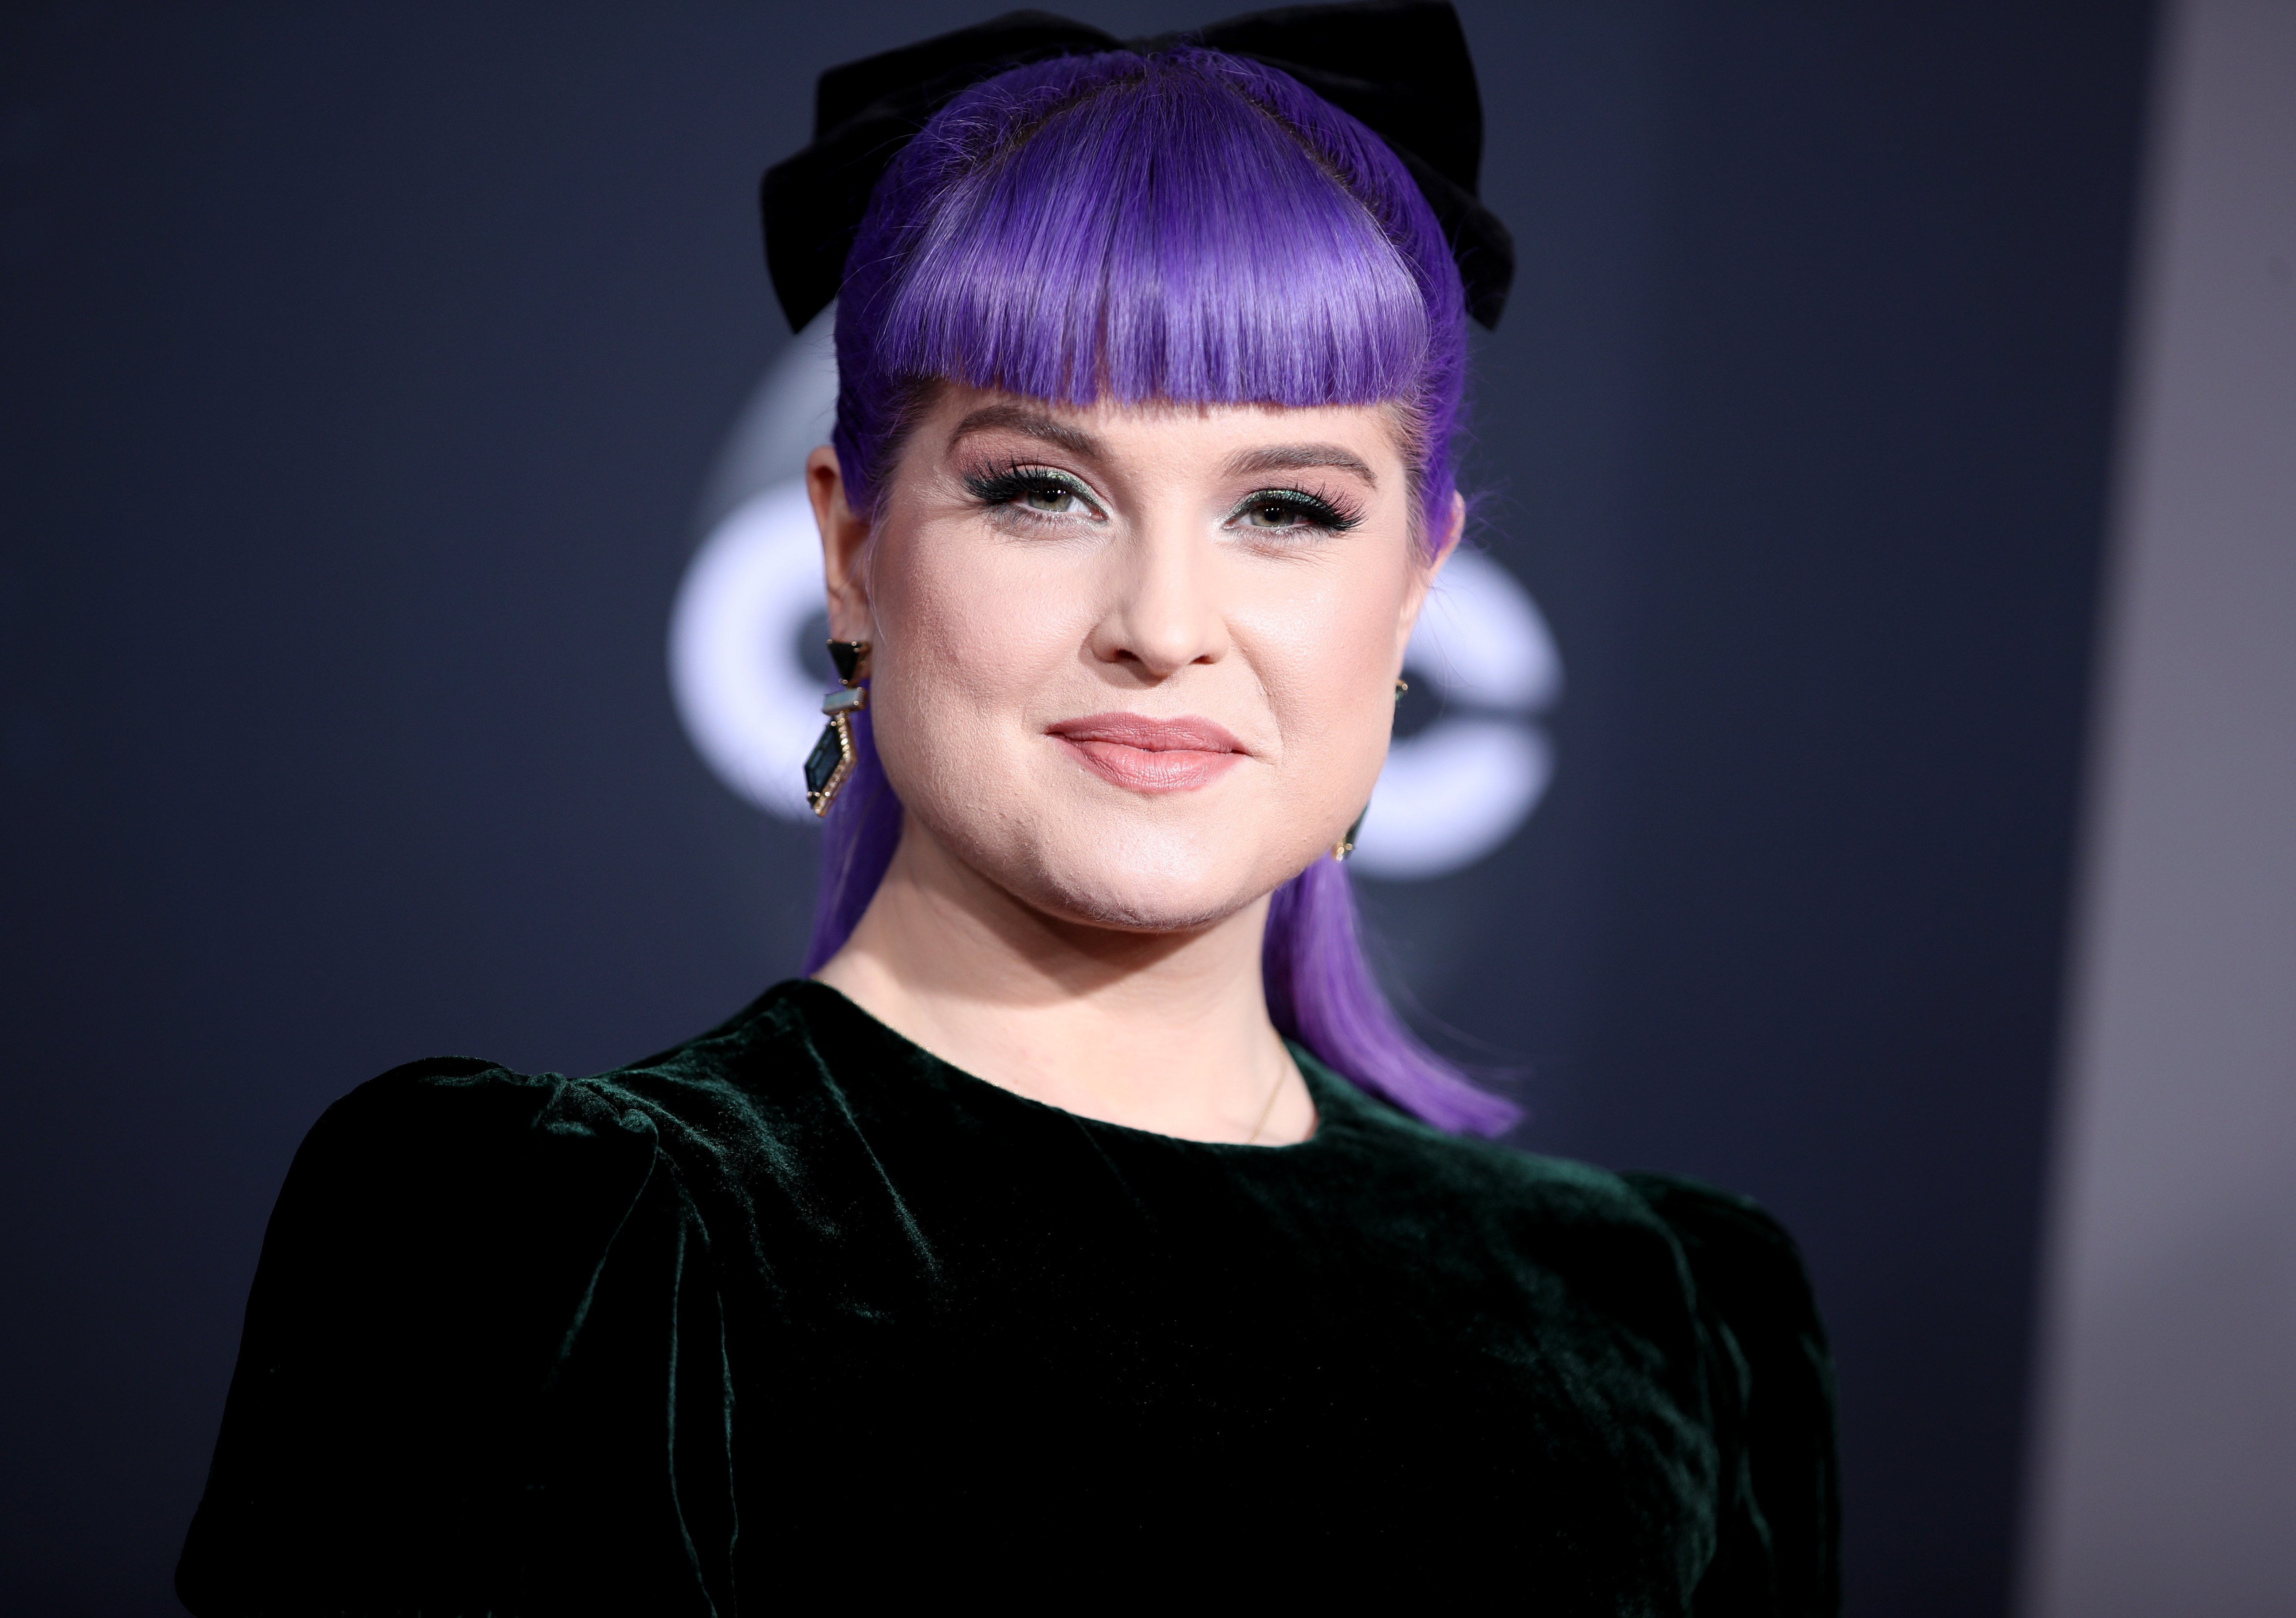 Kelly Osbourne attends the 2019 American Music Awards on November 24, 2019 | Photo: Getty Images.